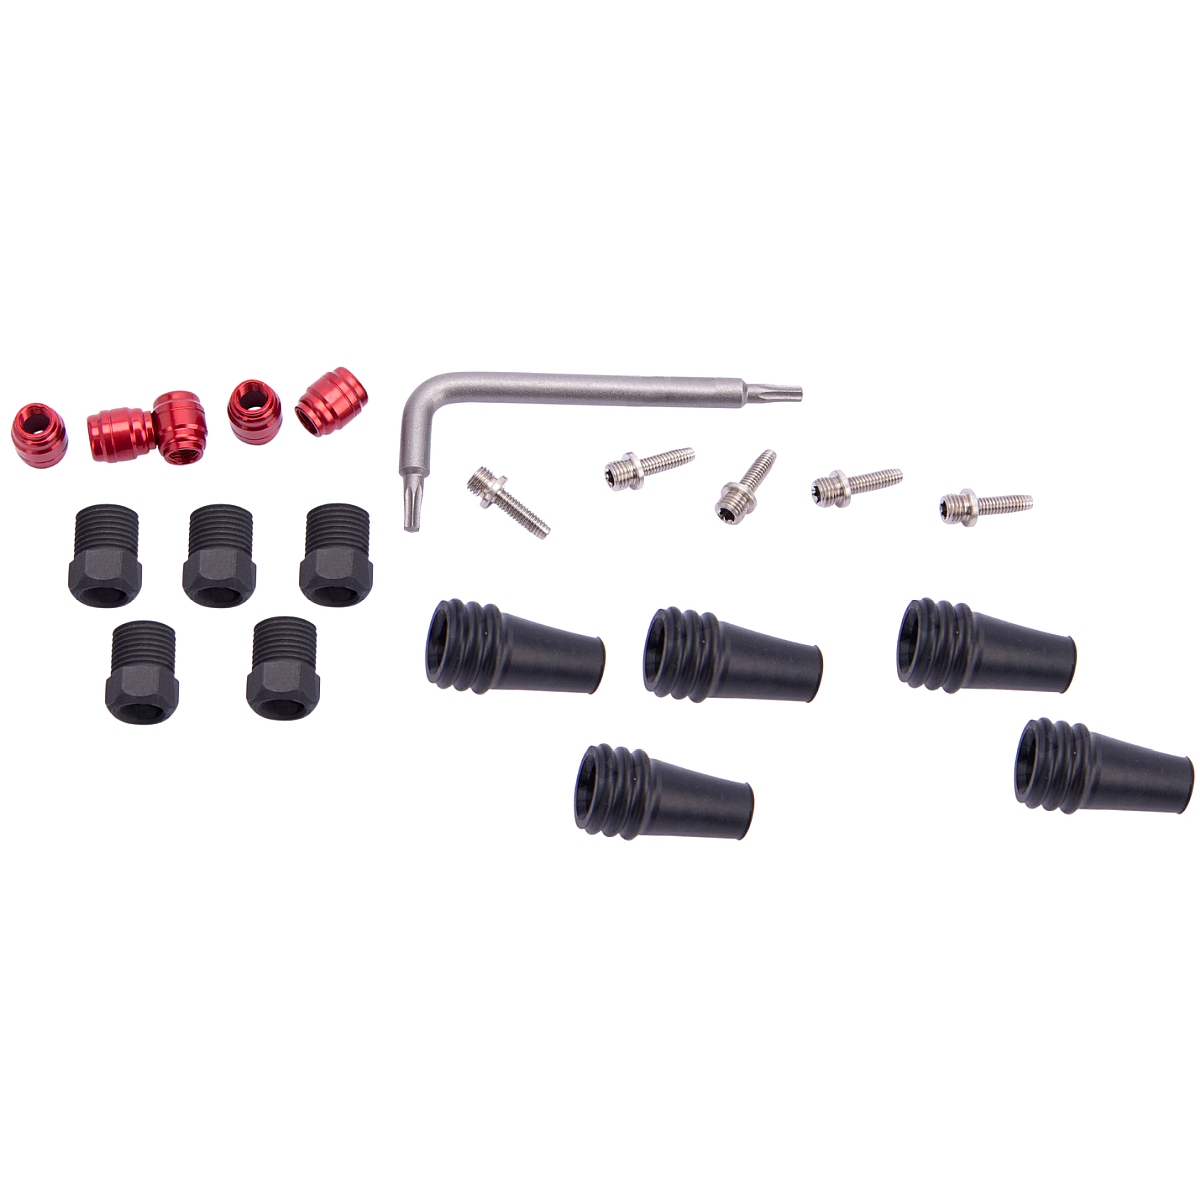 Picture of SRAM Hose Fitting Kit Stealthamajig for Red eTap AXS / Force eTap AXS Disc Brakes - 11.5018.061.000